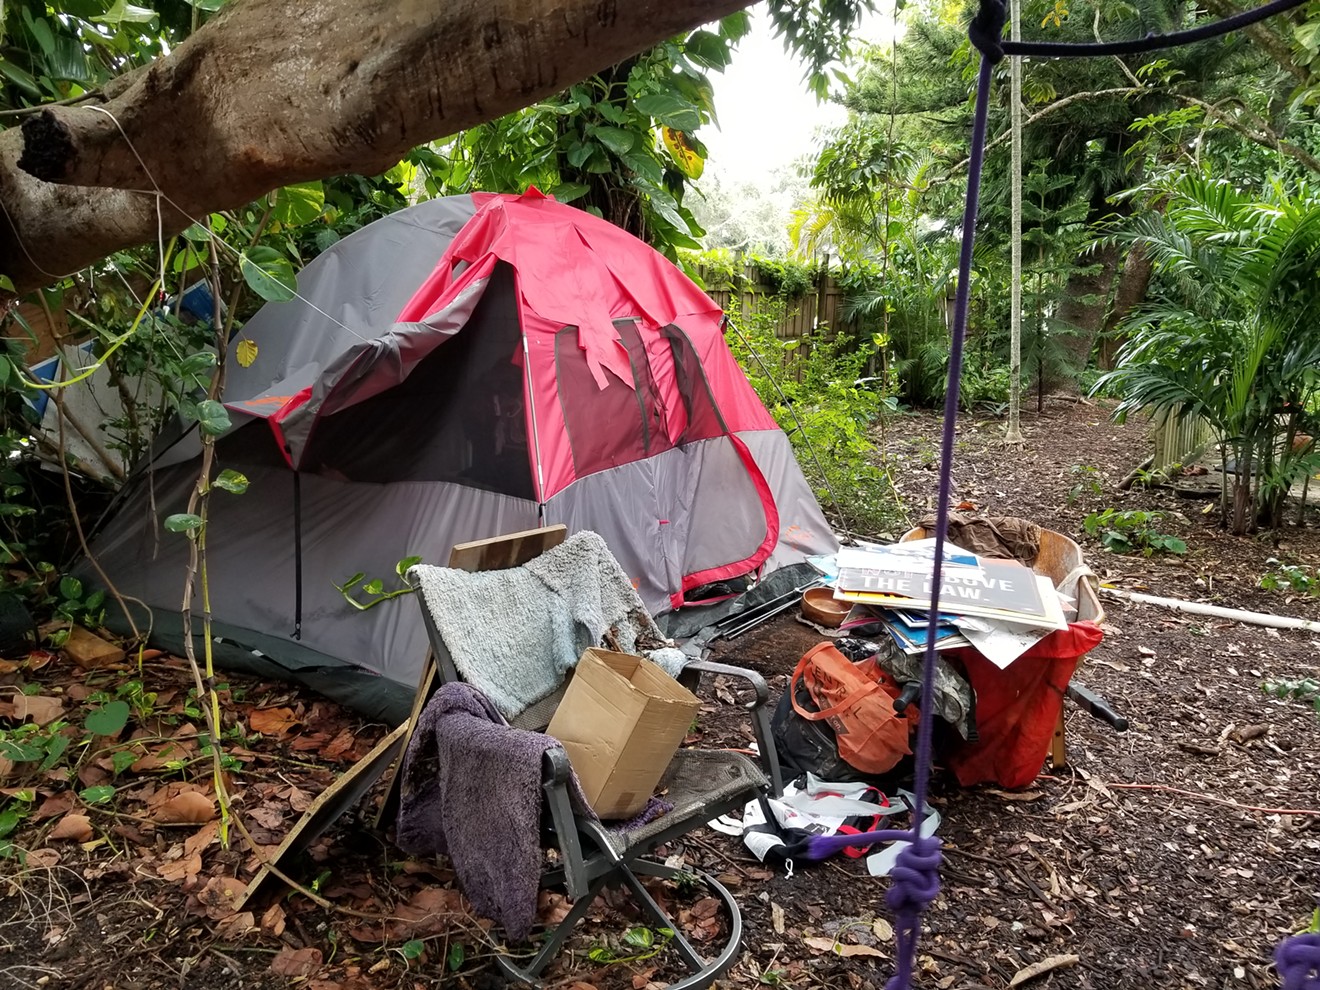 Brandon Hudspeth's tent was cut open and its rain tarp removed at the hippie commune in North Miami he was living in.